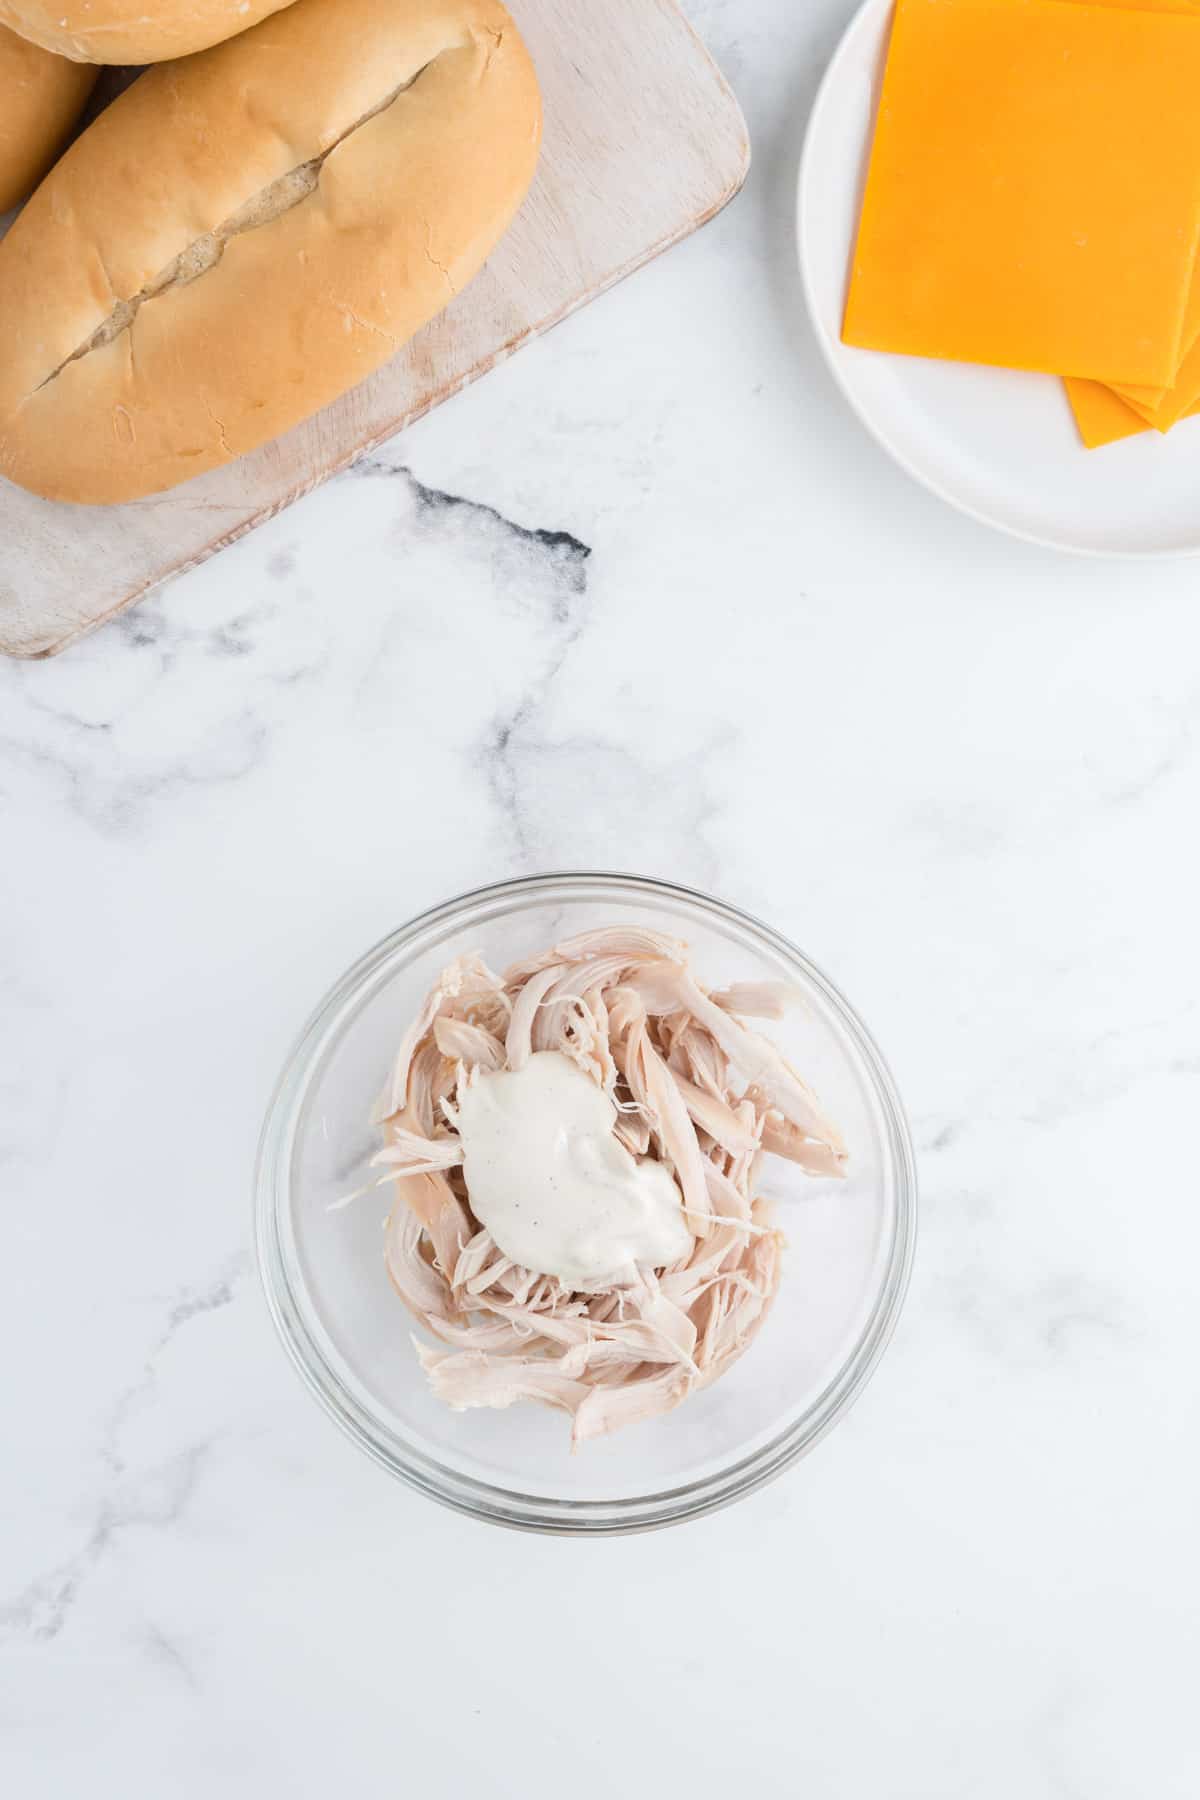 Shredded chicken in a glass bowl with a dollop of ranch dressing on top.